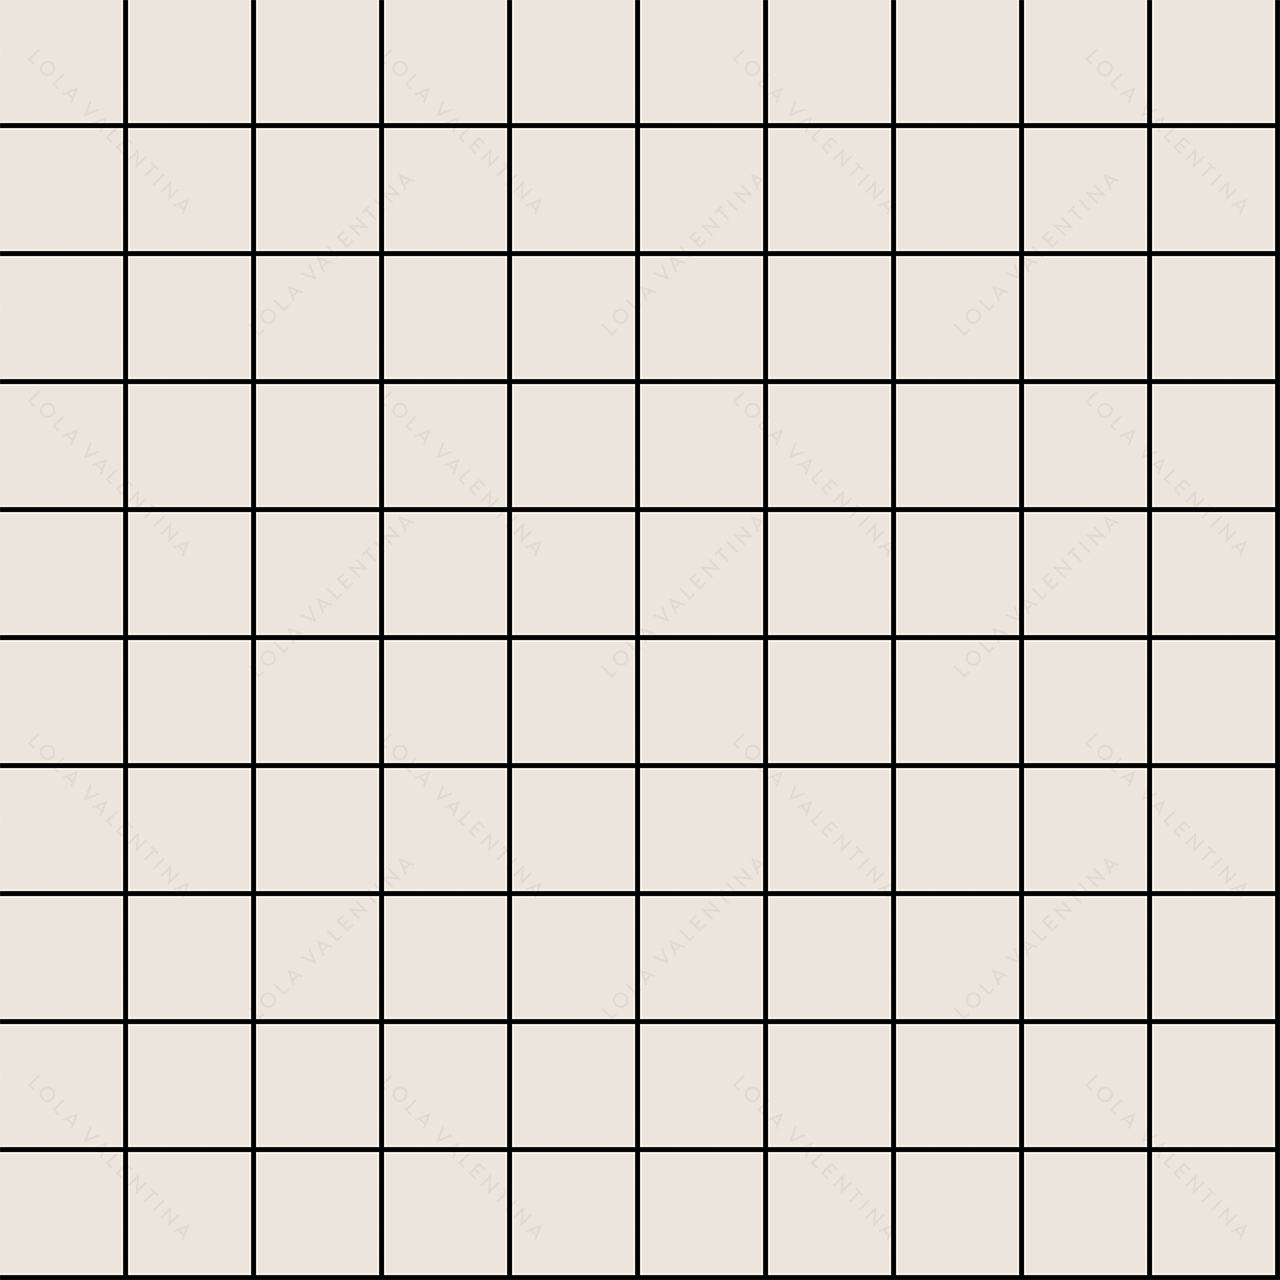 Black-and-white-grid-pattern